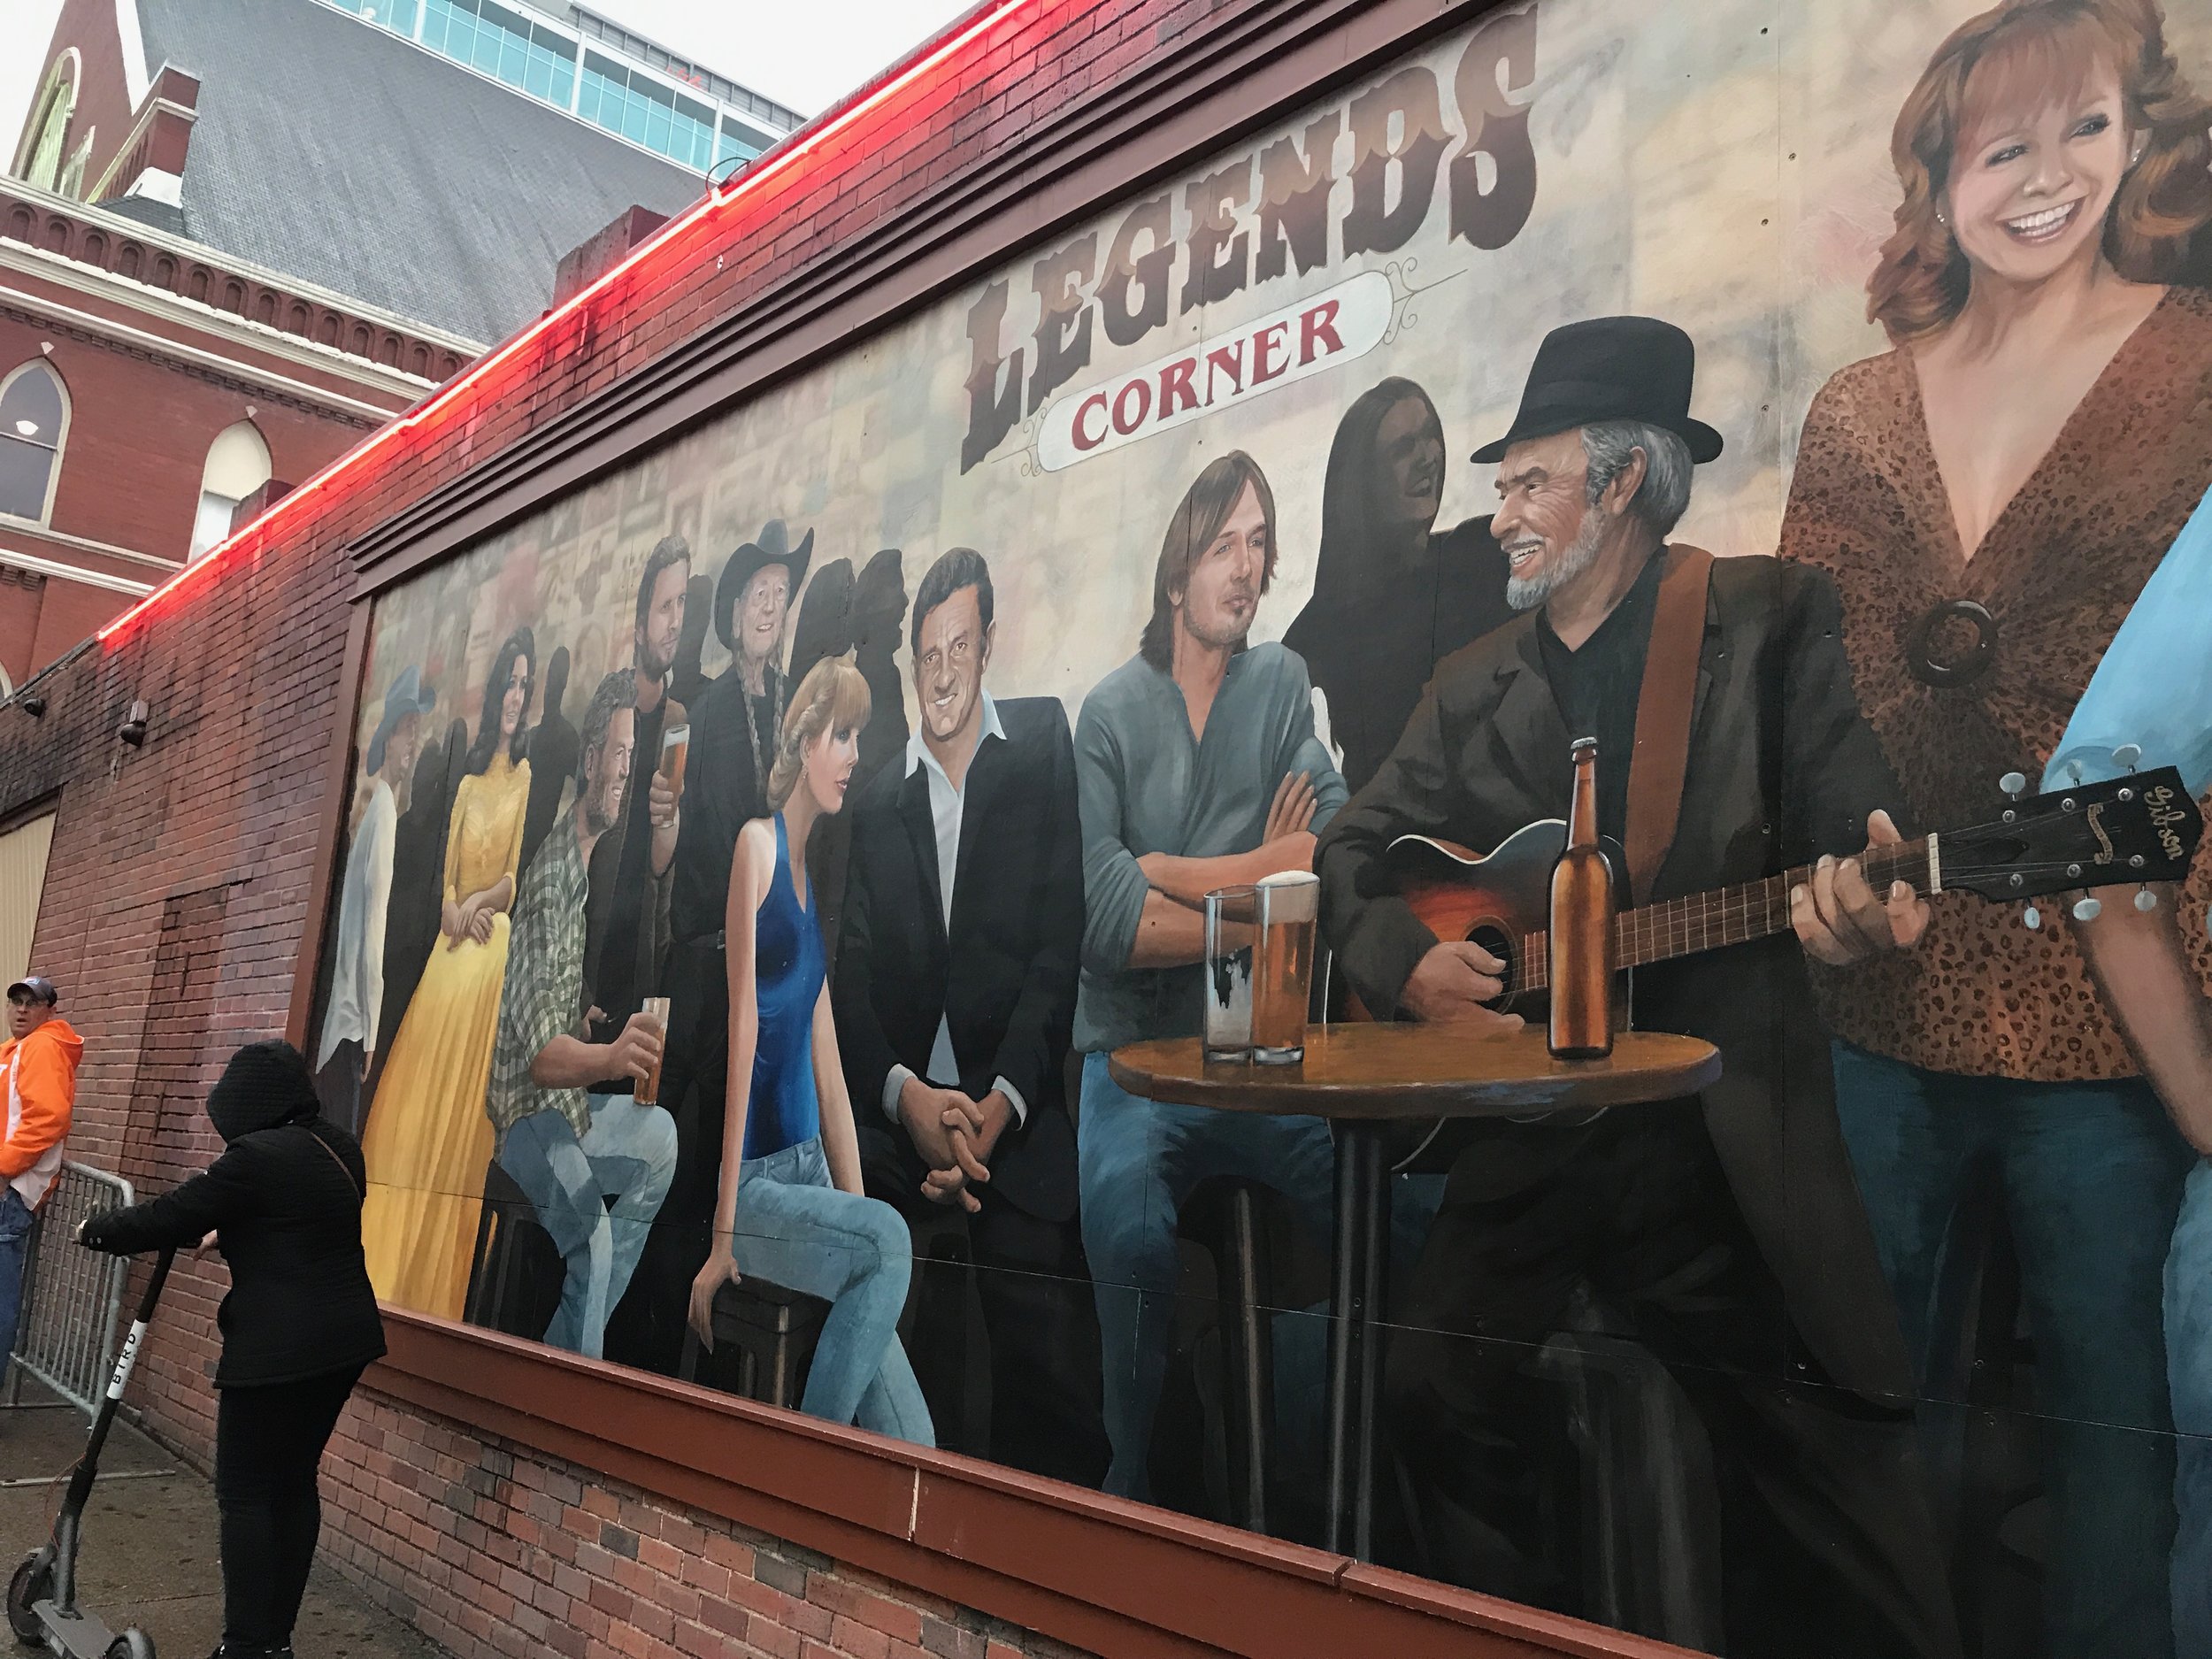  A mural of country music legends outside a bar on Broadway in Nashville     